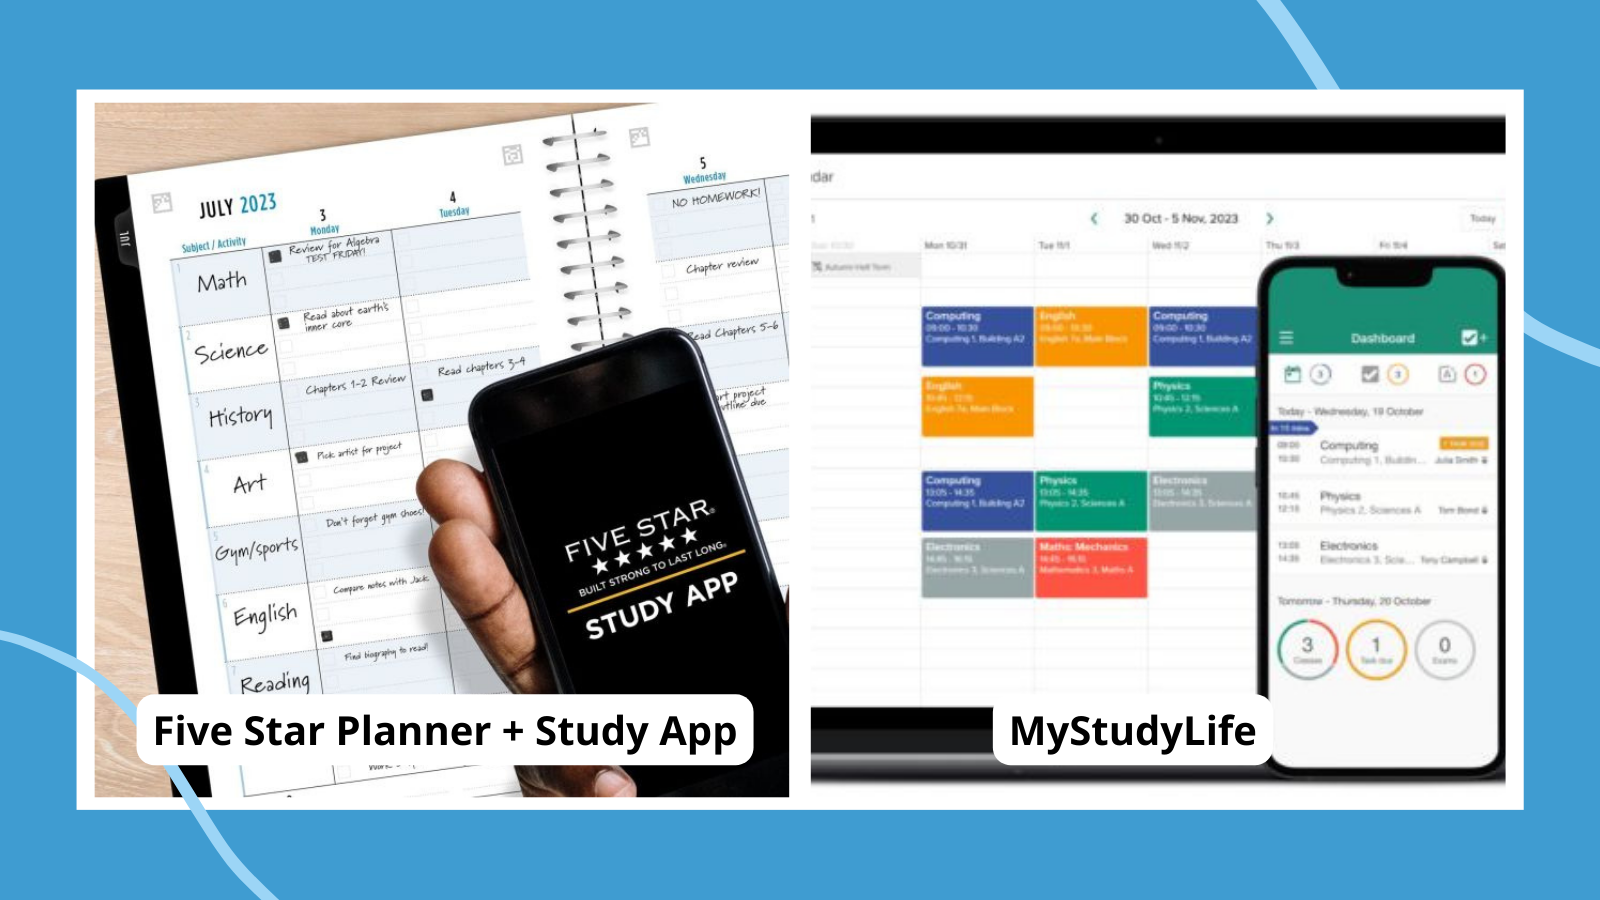 College of academic planners for students, including Five Star Planner + Study App and MyStudyLife